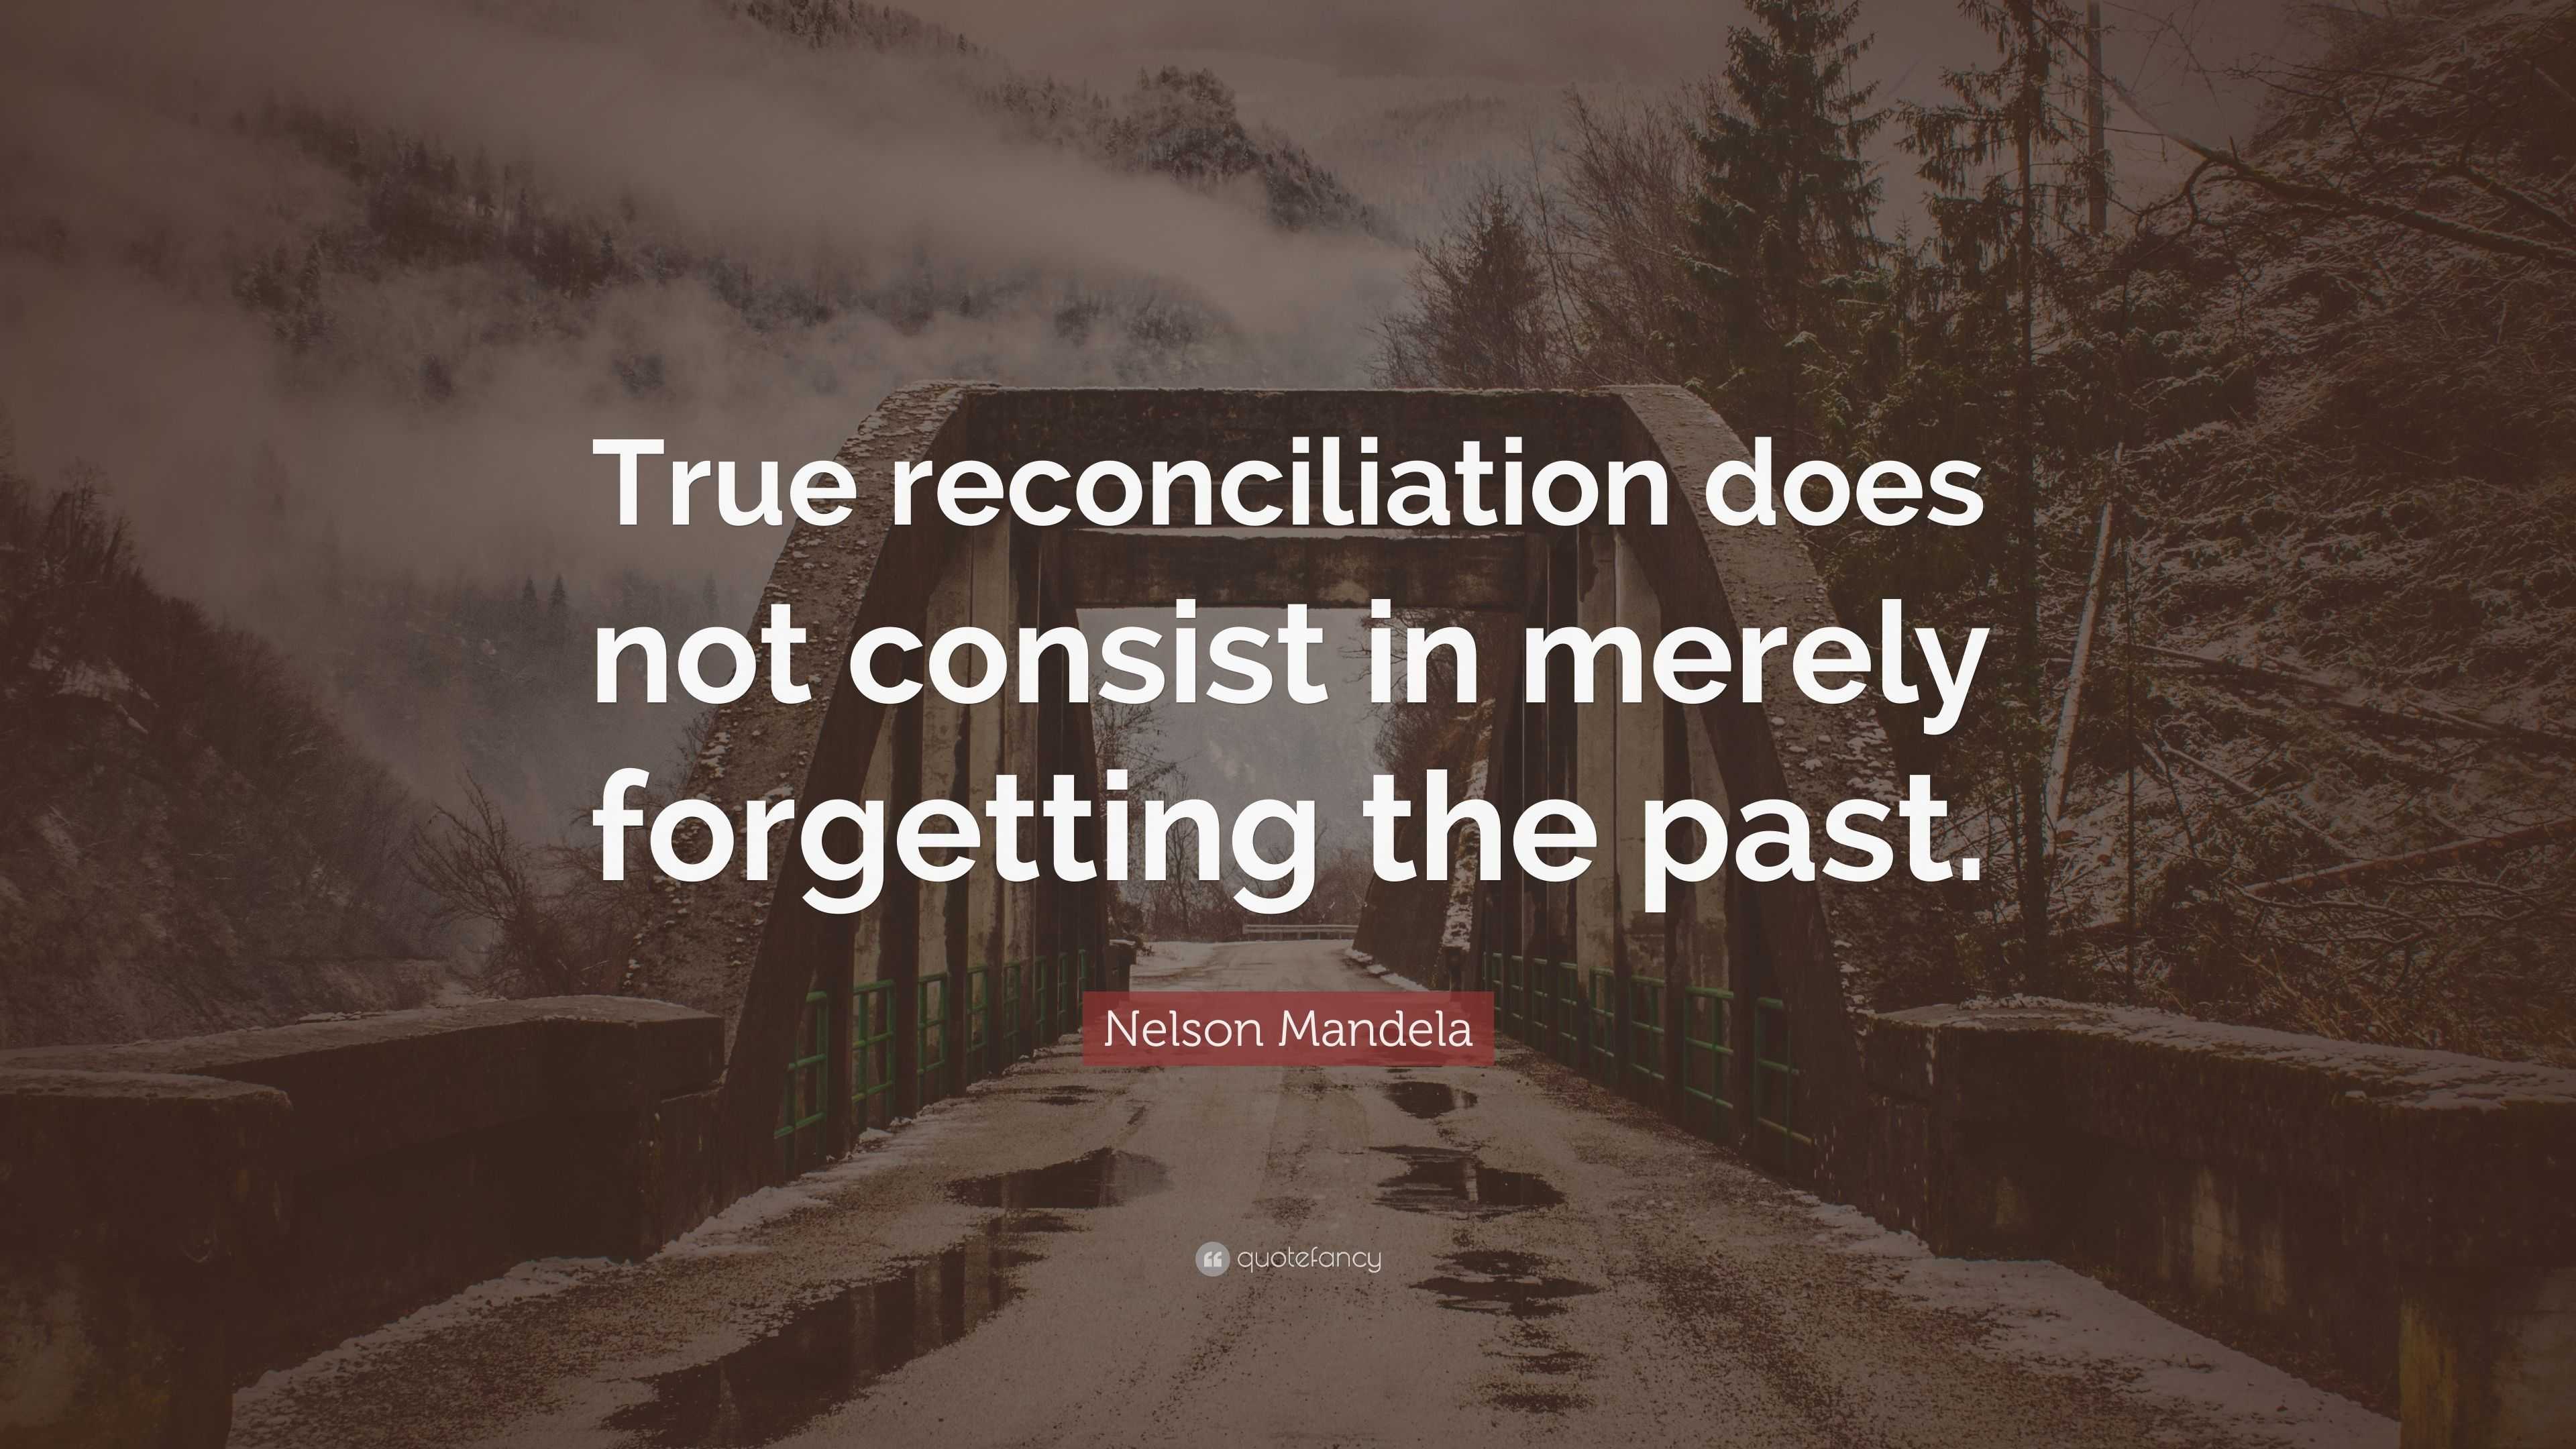 Nelson Mandela Quote: “True reconciliation does not consist in merely